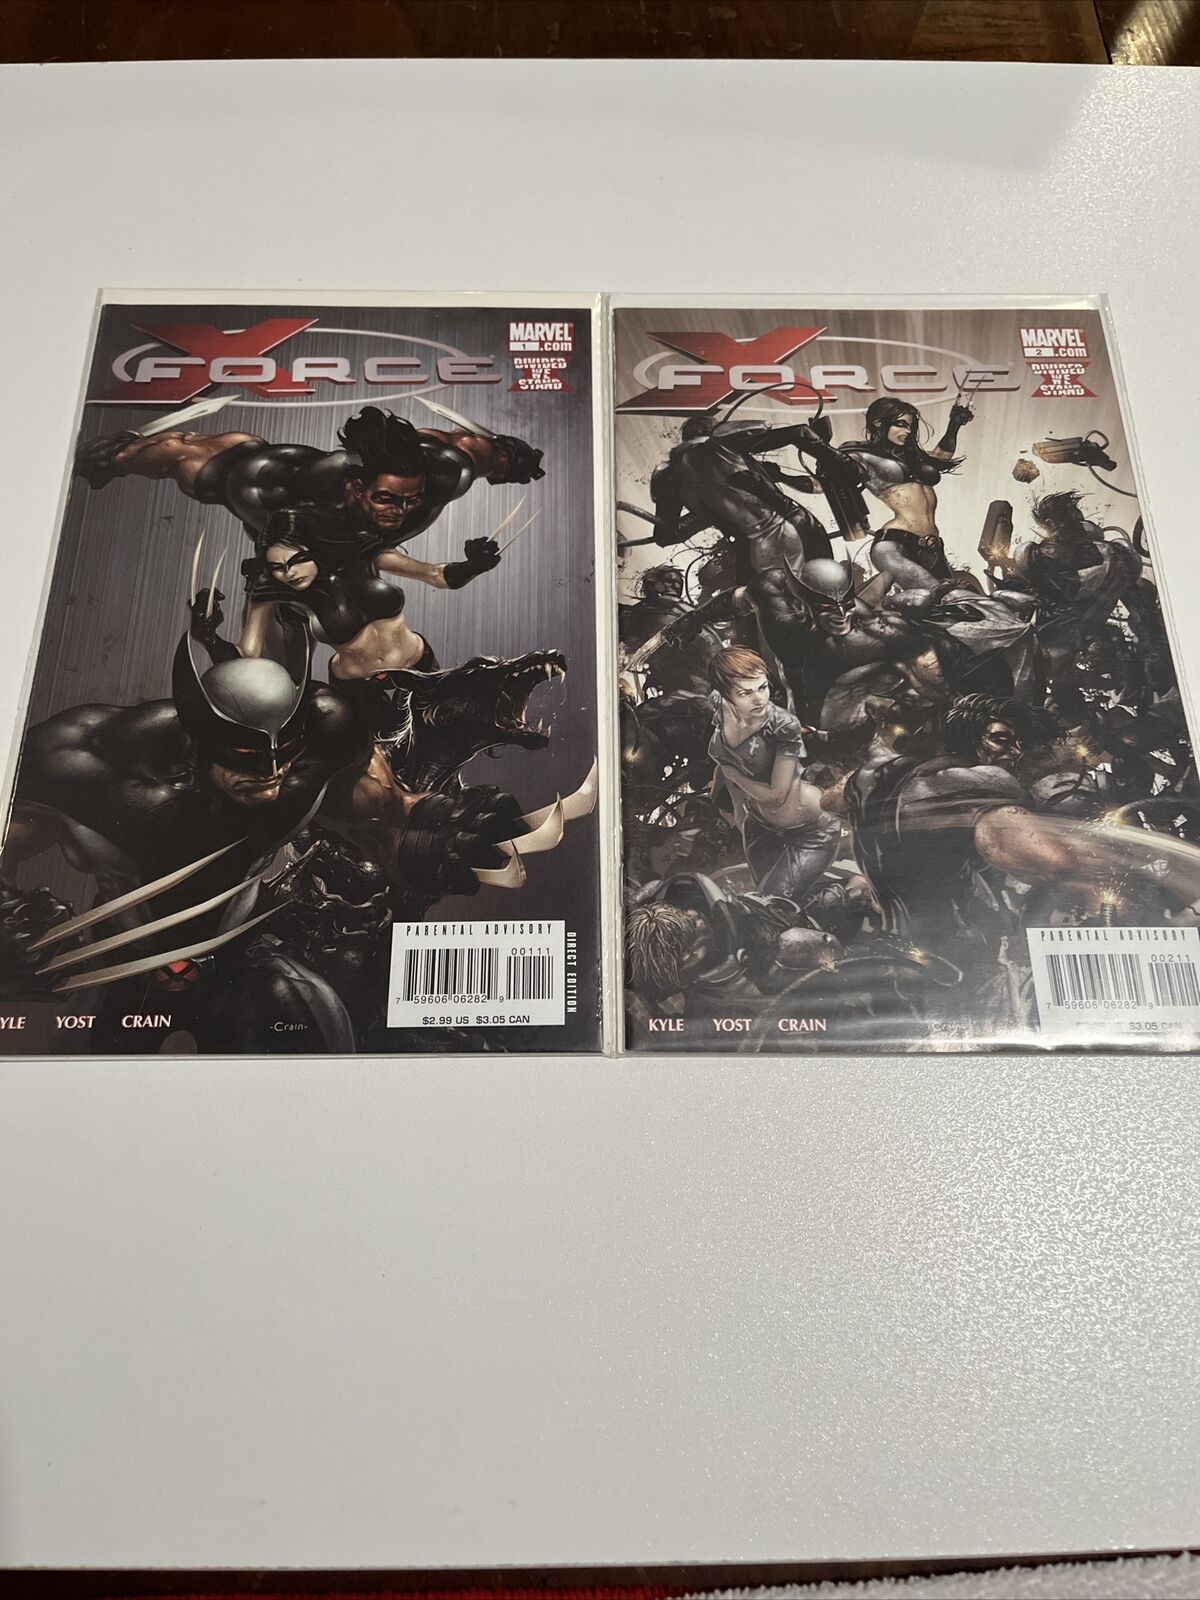 X-Force Volume 3 Marvel Comics Complete #1-28 Lot With Variants VF-NM - Box 20